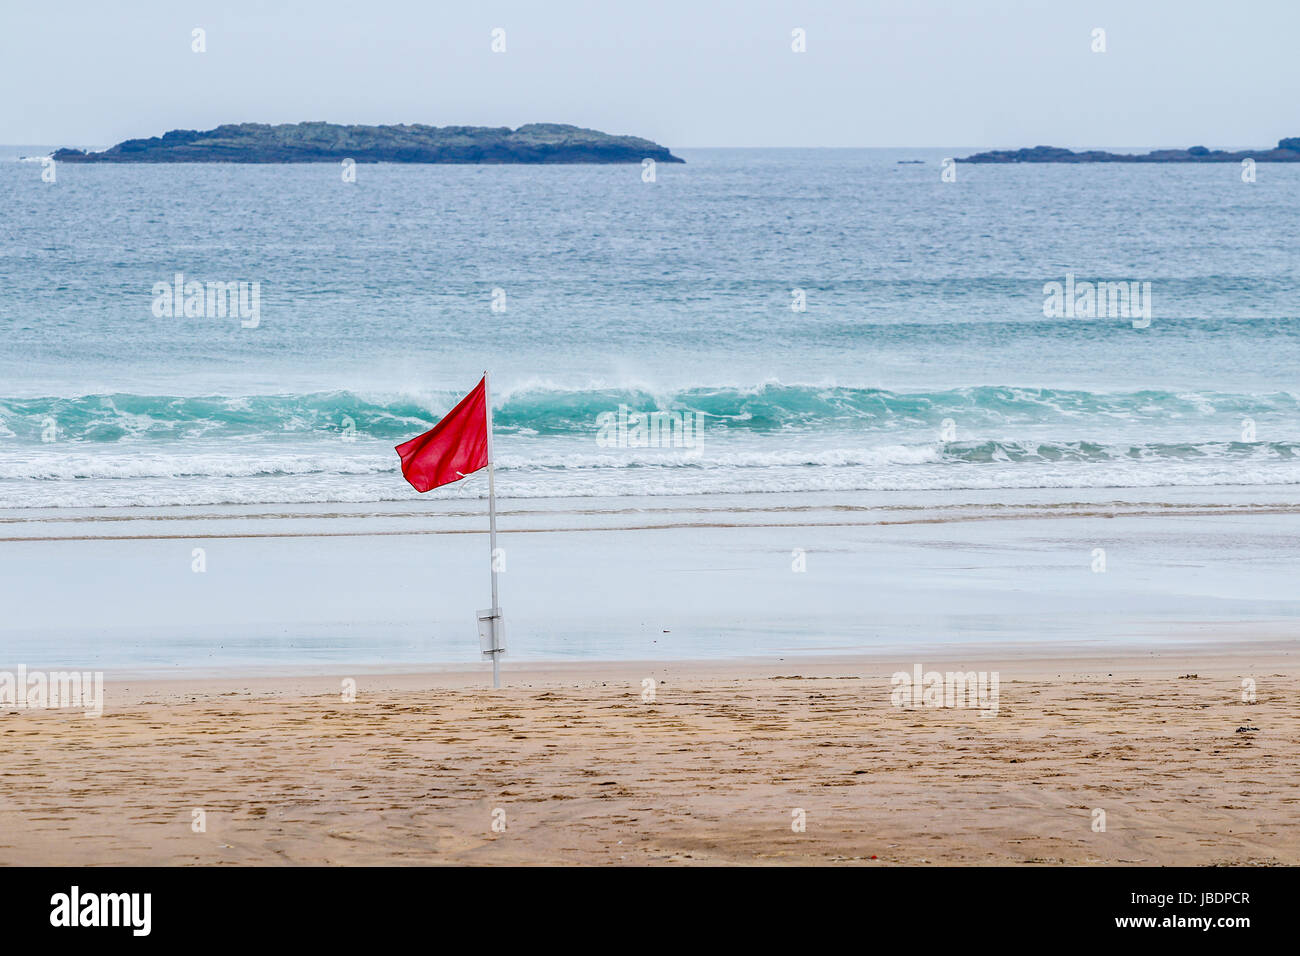 Red flag on the beach at Portrush, Northern Ireland indicating a hazard such as high surf or strong currents Stock Photo